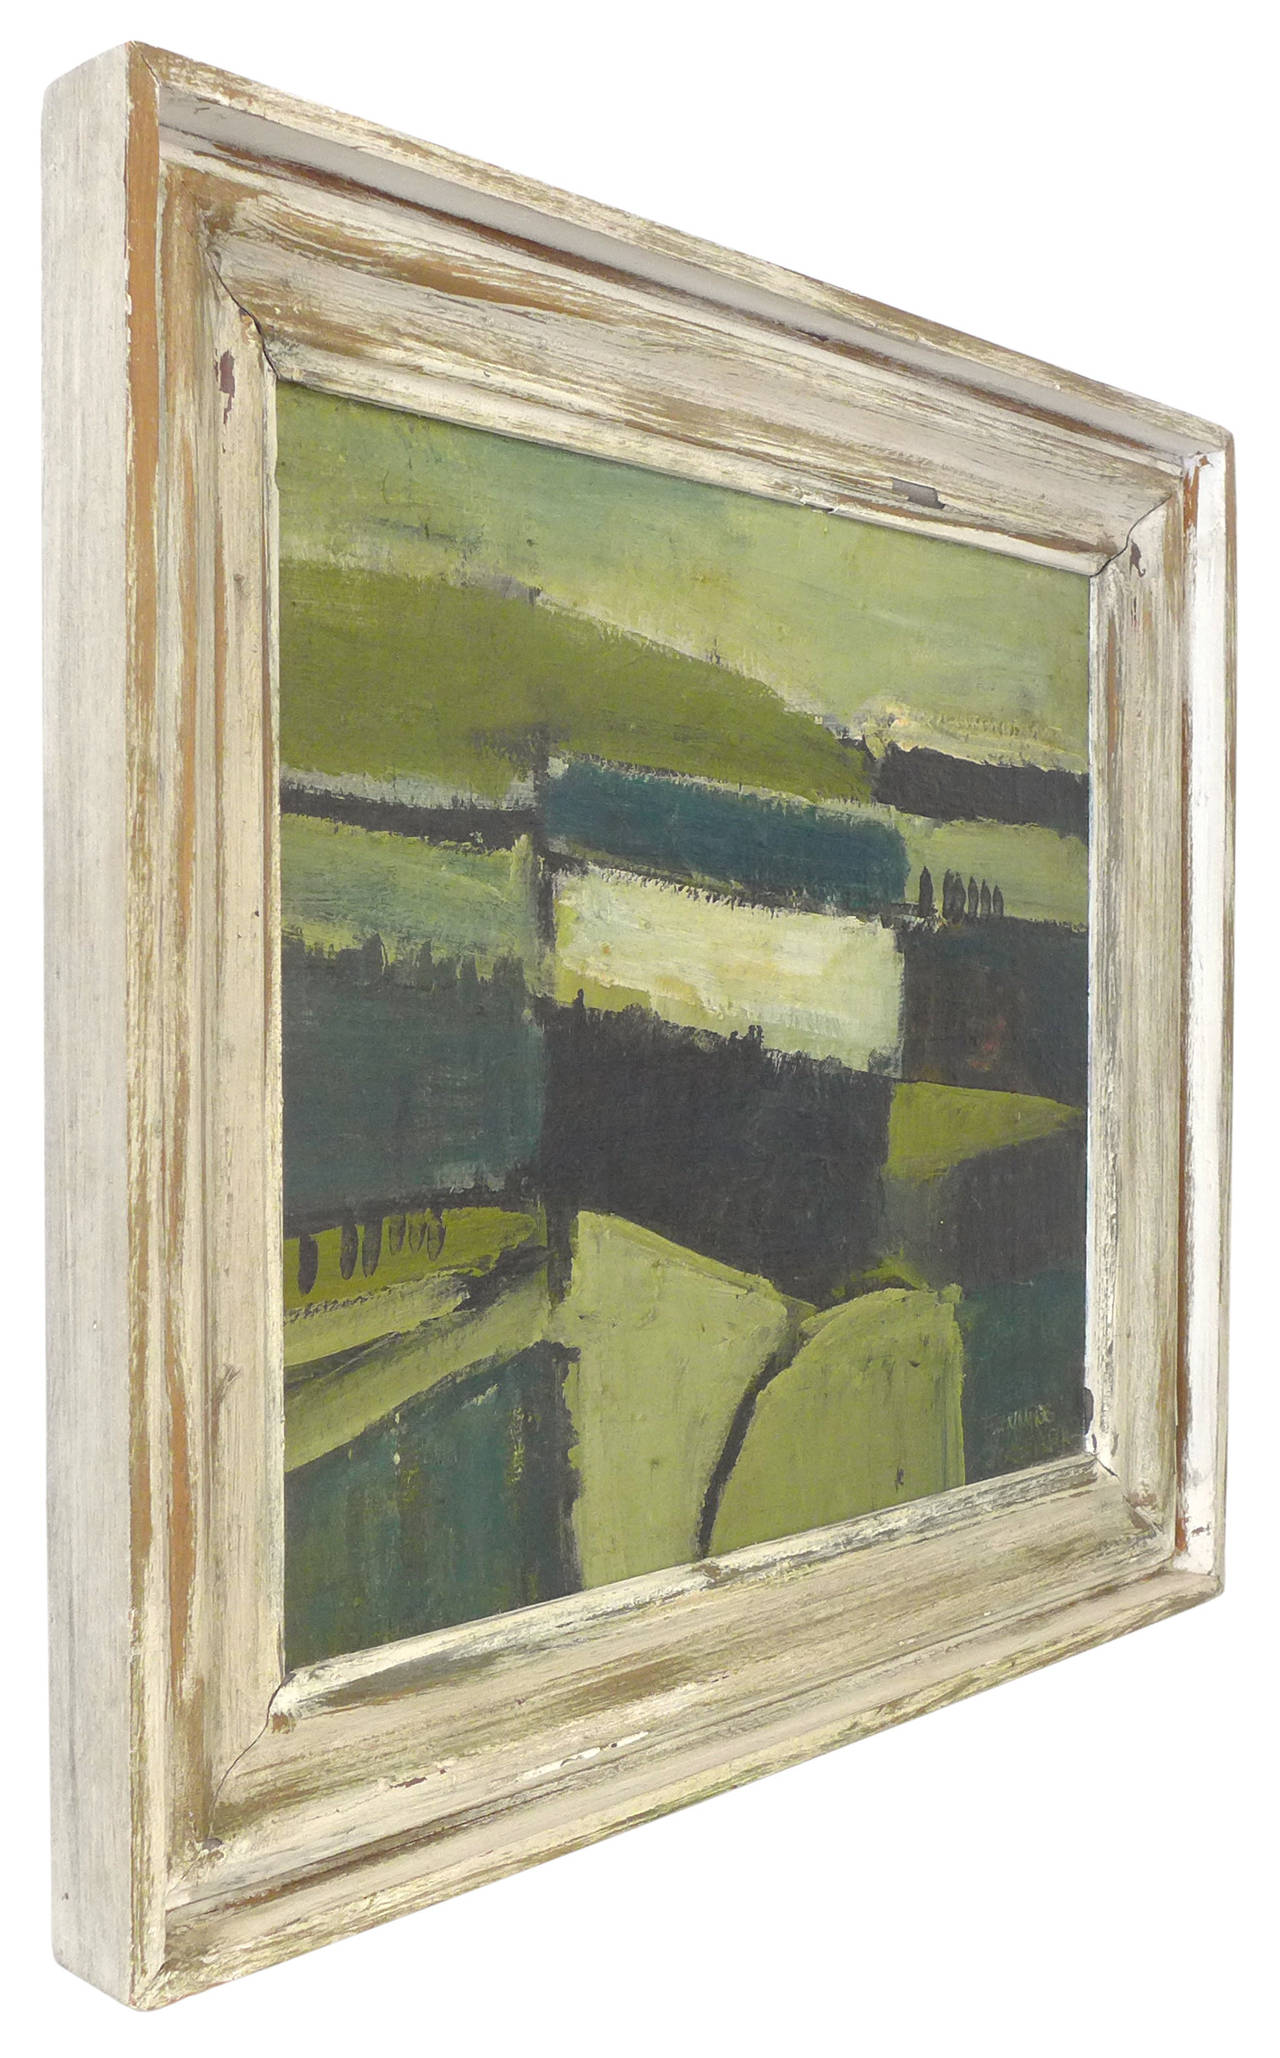 A fantastic abstract-expressionist landscape painting by Danish-born, Victoria-based artist Flemming Jorgensen.  Executed in oil and casein with wax, a beautifully-reduced countryside in a wide spectrum of muted greens, appropriately titled,